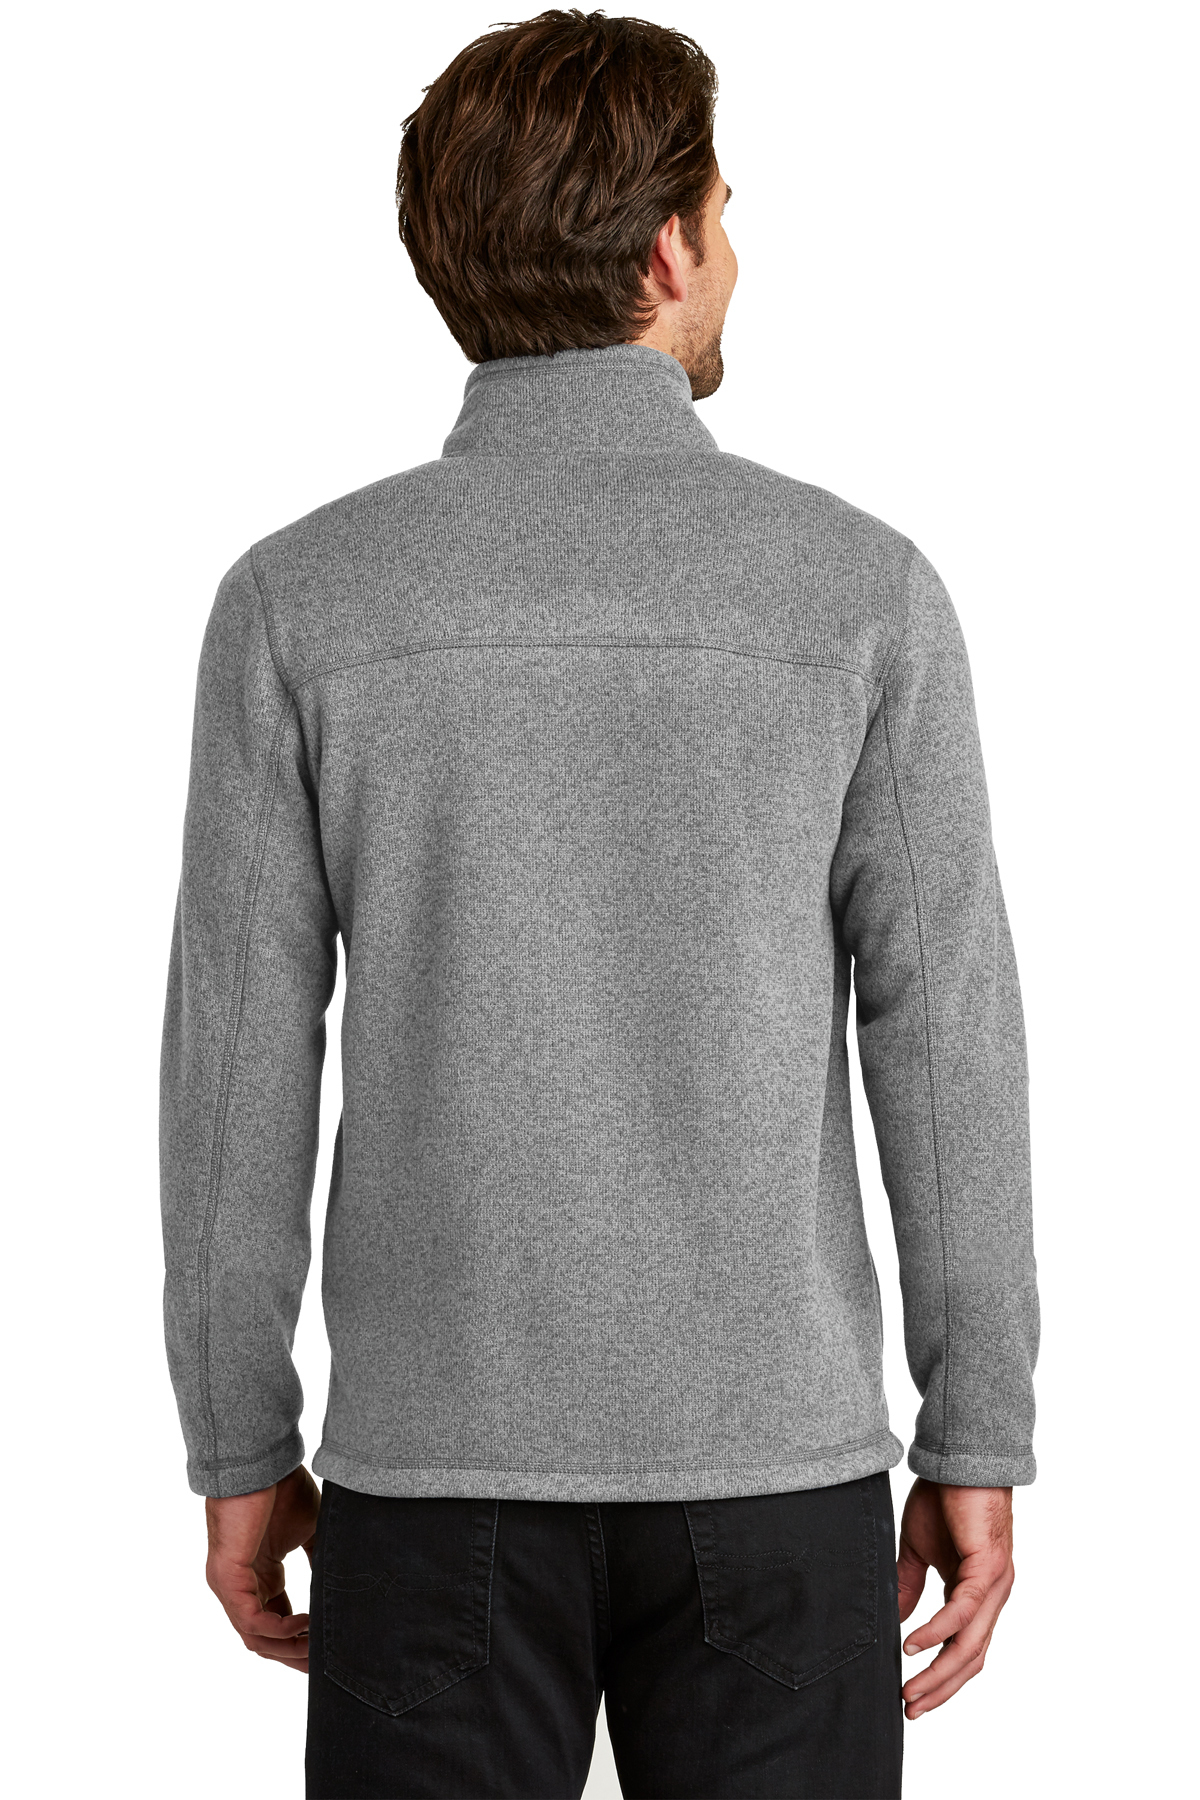 The North Face® Sweater Fleece Jacket - The Monogram Company